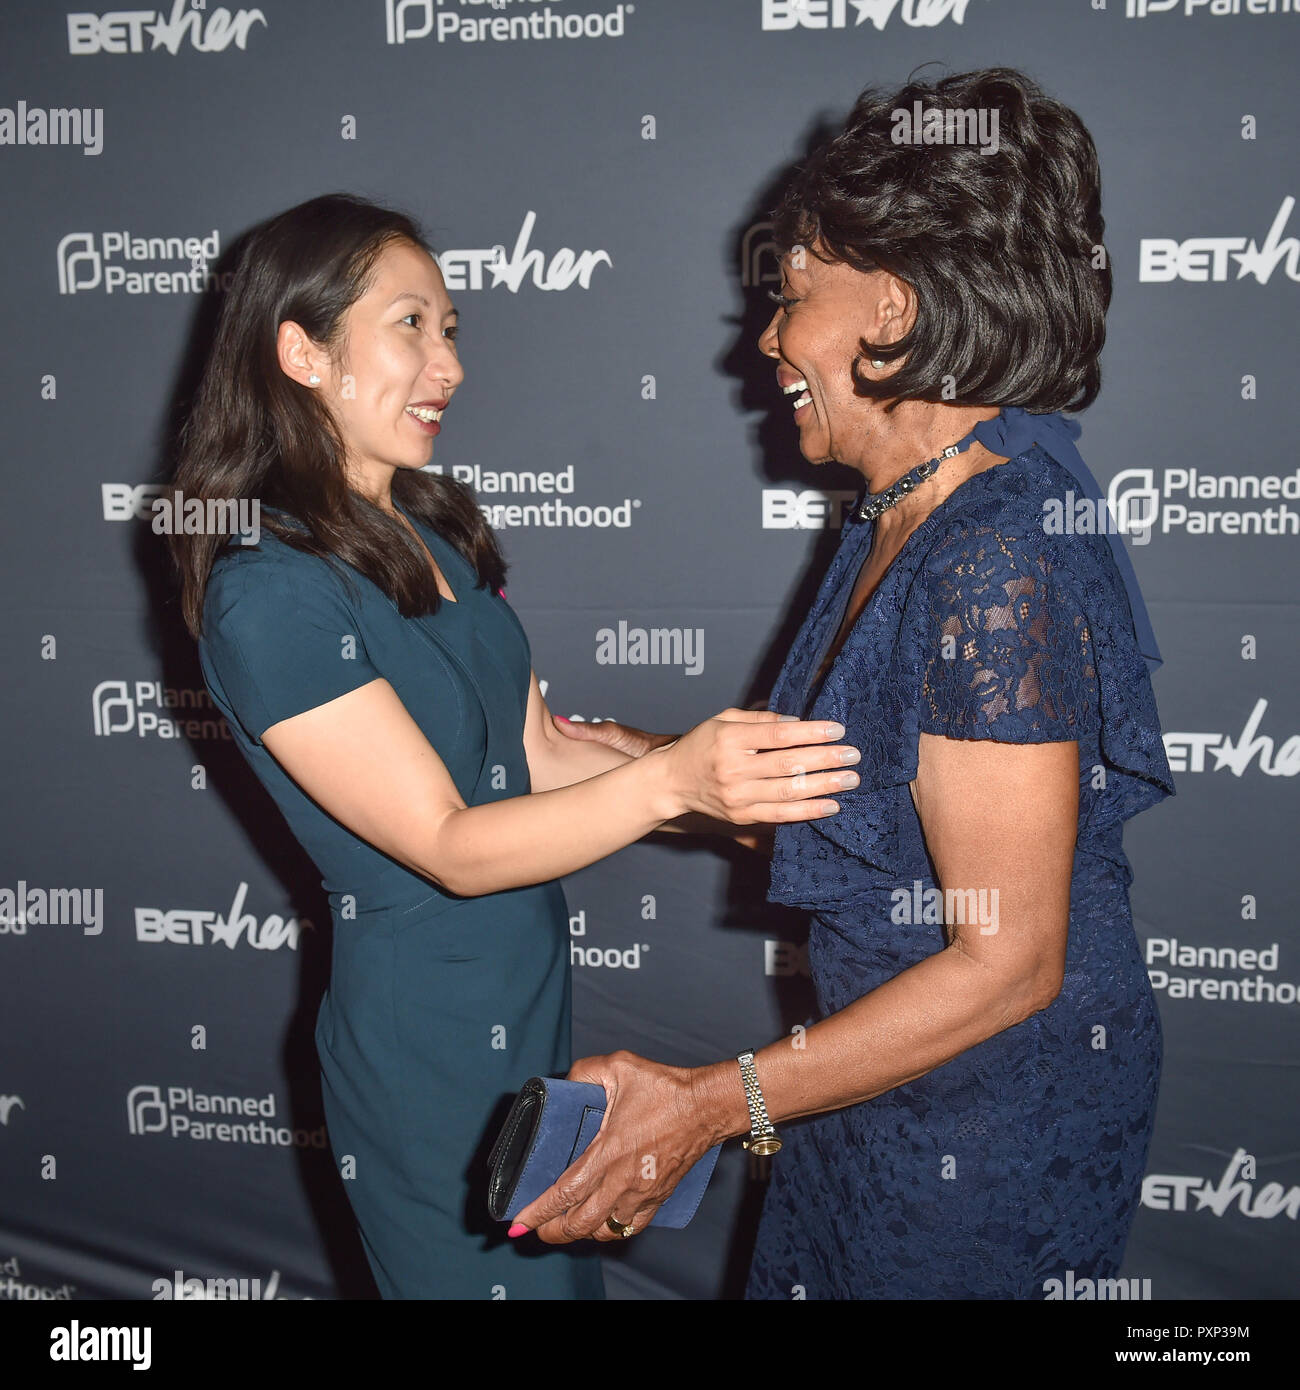 2018 Planned Parenthood Federation of America's Annual Champions of Womens Health Brunch at the Hamilton  Featuring: Dr. Leana Wen, Maxine Waters Where: Washingon DC, District Of Columbia, United States When: 15 Sep 2018 Credit: WENN.com Stock Photo